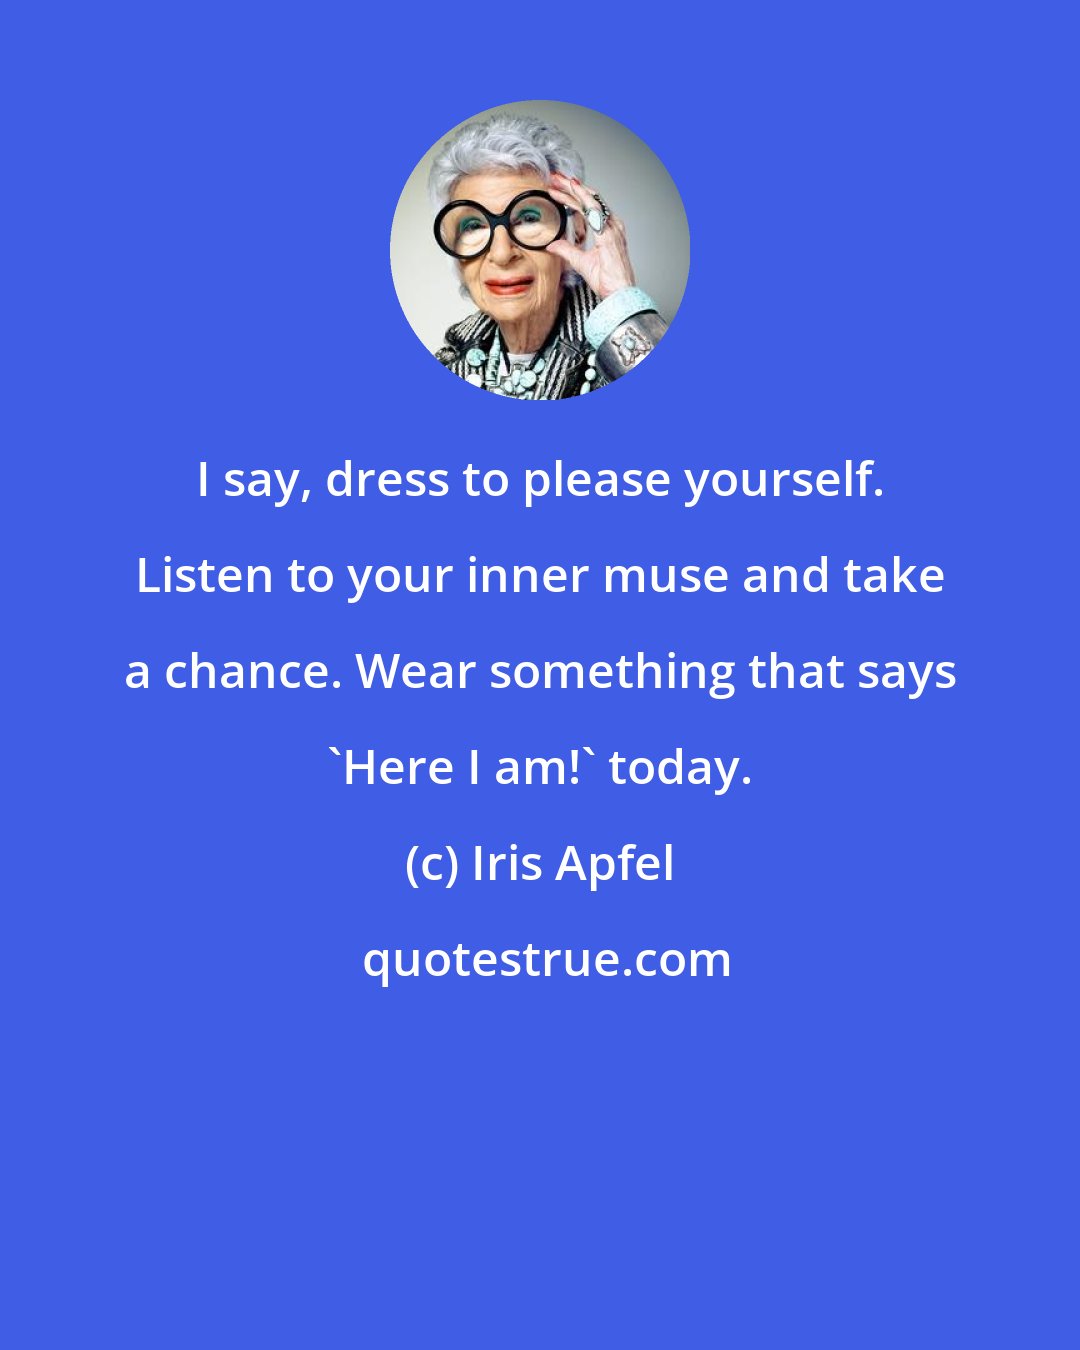 Iris Apfel: I say, dress to please yourself. Listen to your inner muse and take a chance. Wear something that says 'Here I am!' today.